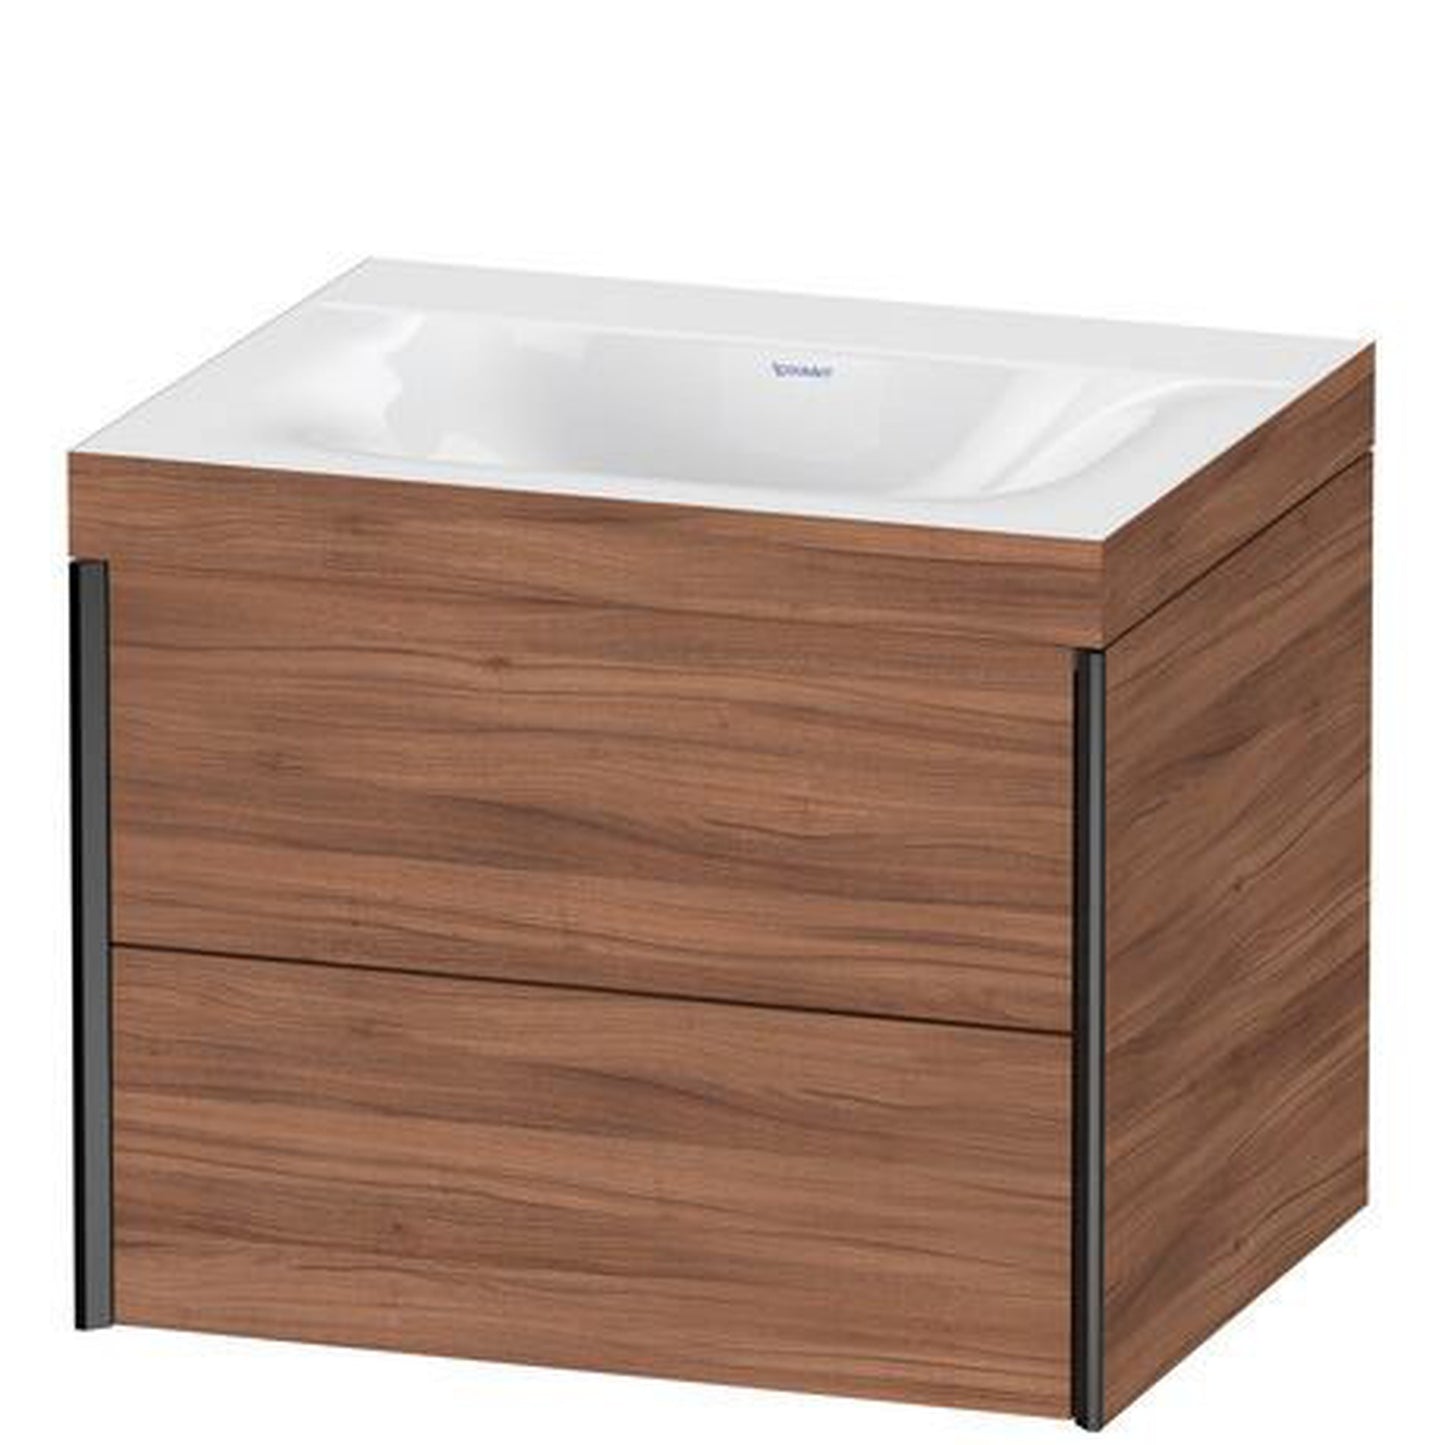 Duravit Xviu 24" x 20" x 19" Two Drawer C-Bonded Wall-Mount Vanity Kit Without Tap Hole, Walnut (XV4614NB279C)